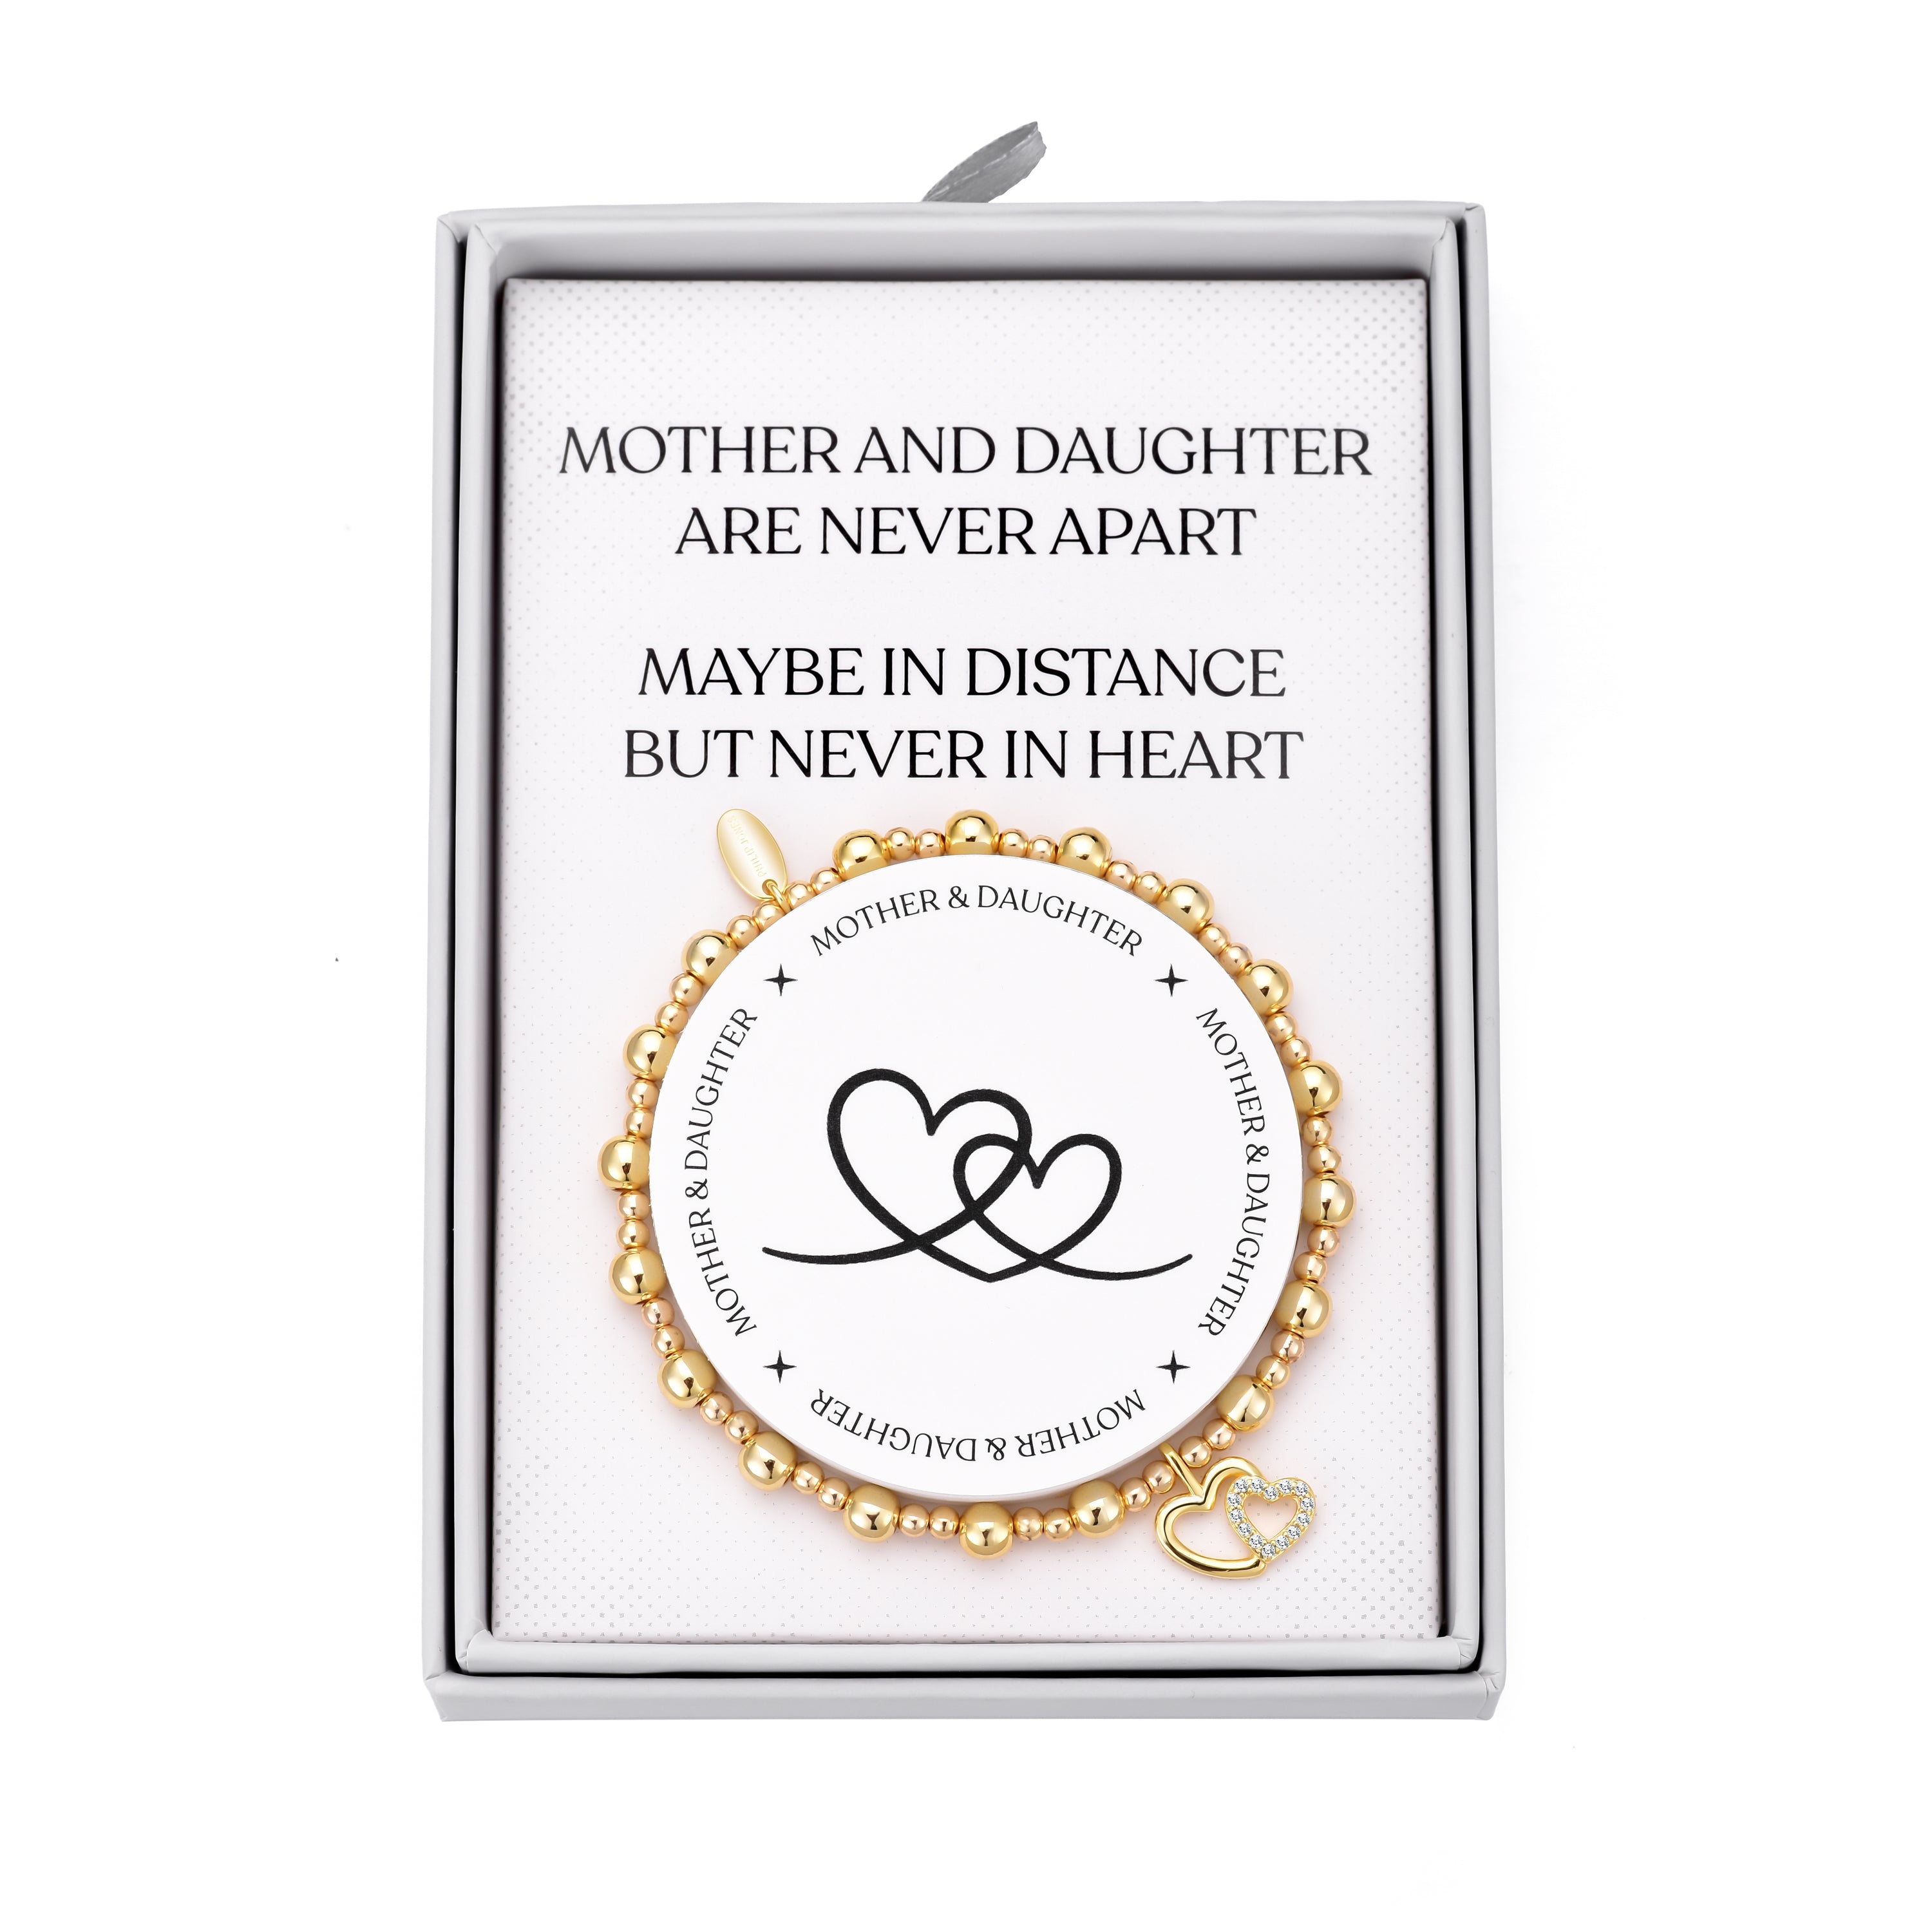 Gold Plated Mother and Daughter Quote Stretch Bracelet with Gift Box by Philip Jones Jewellery